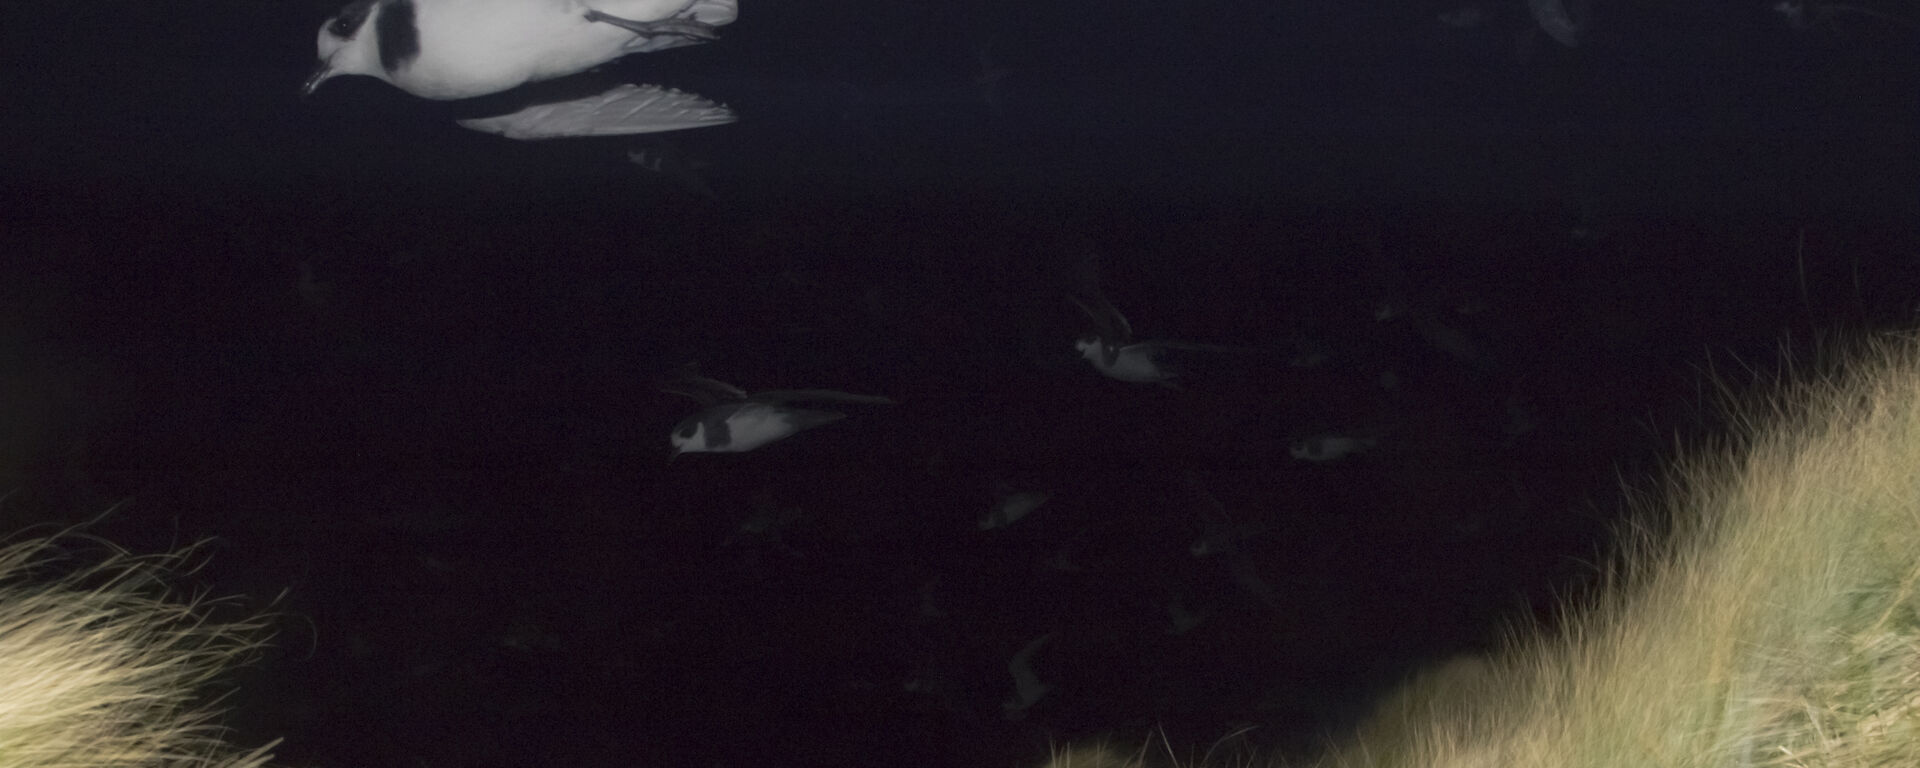 Hundreds of blue petrels returning to land after dark — they flit past the camera set up at North Head, Macquarie Island — the camera captures them as ghostly outlines against the dark night sky.